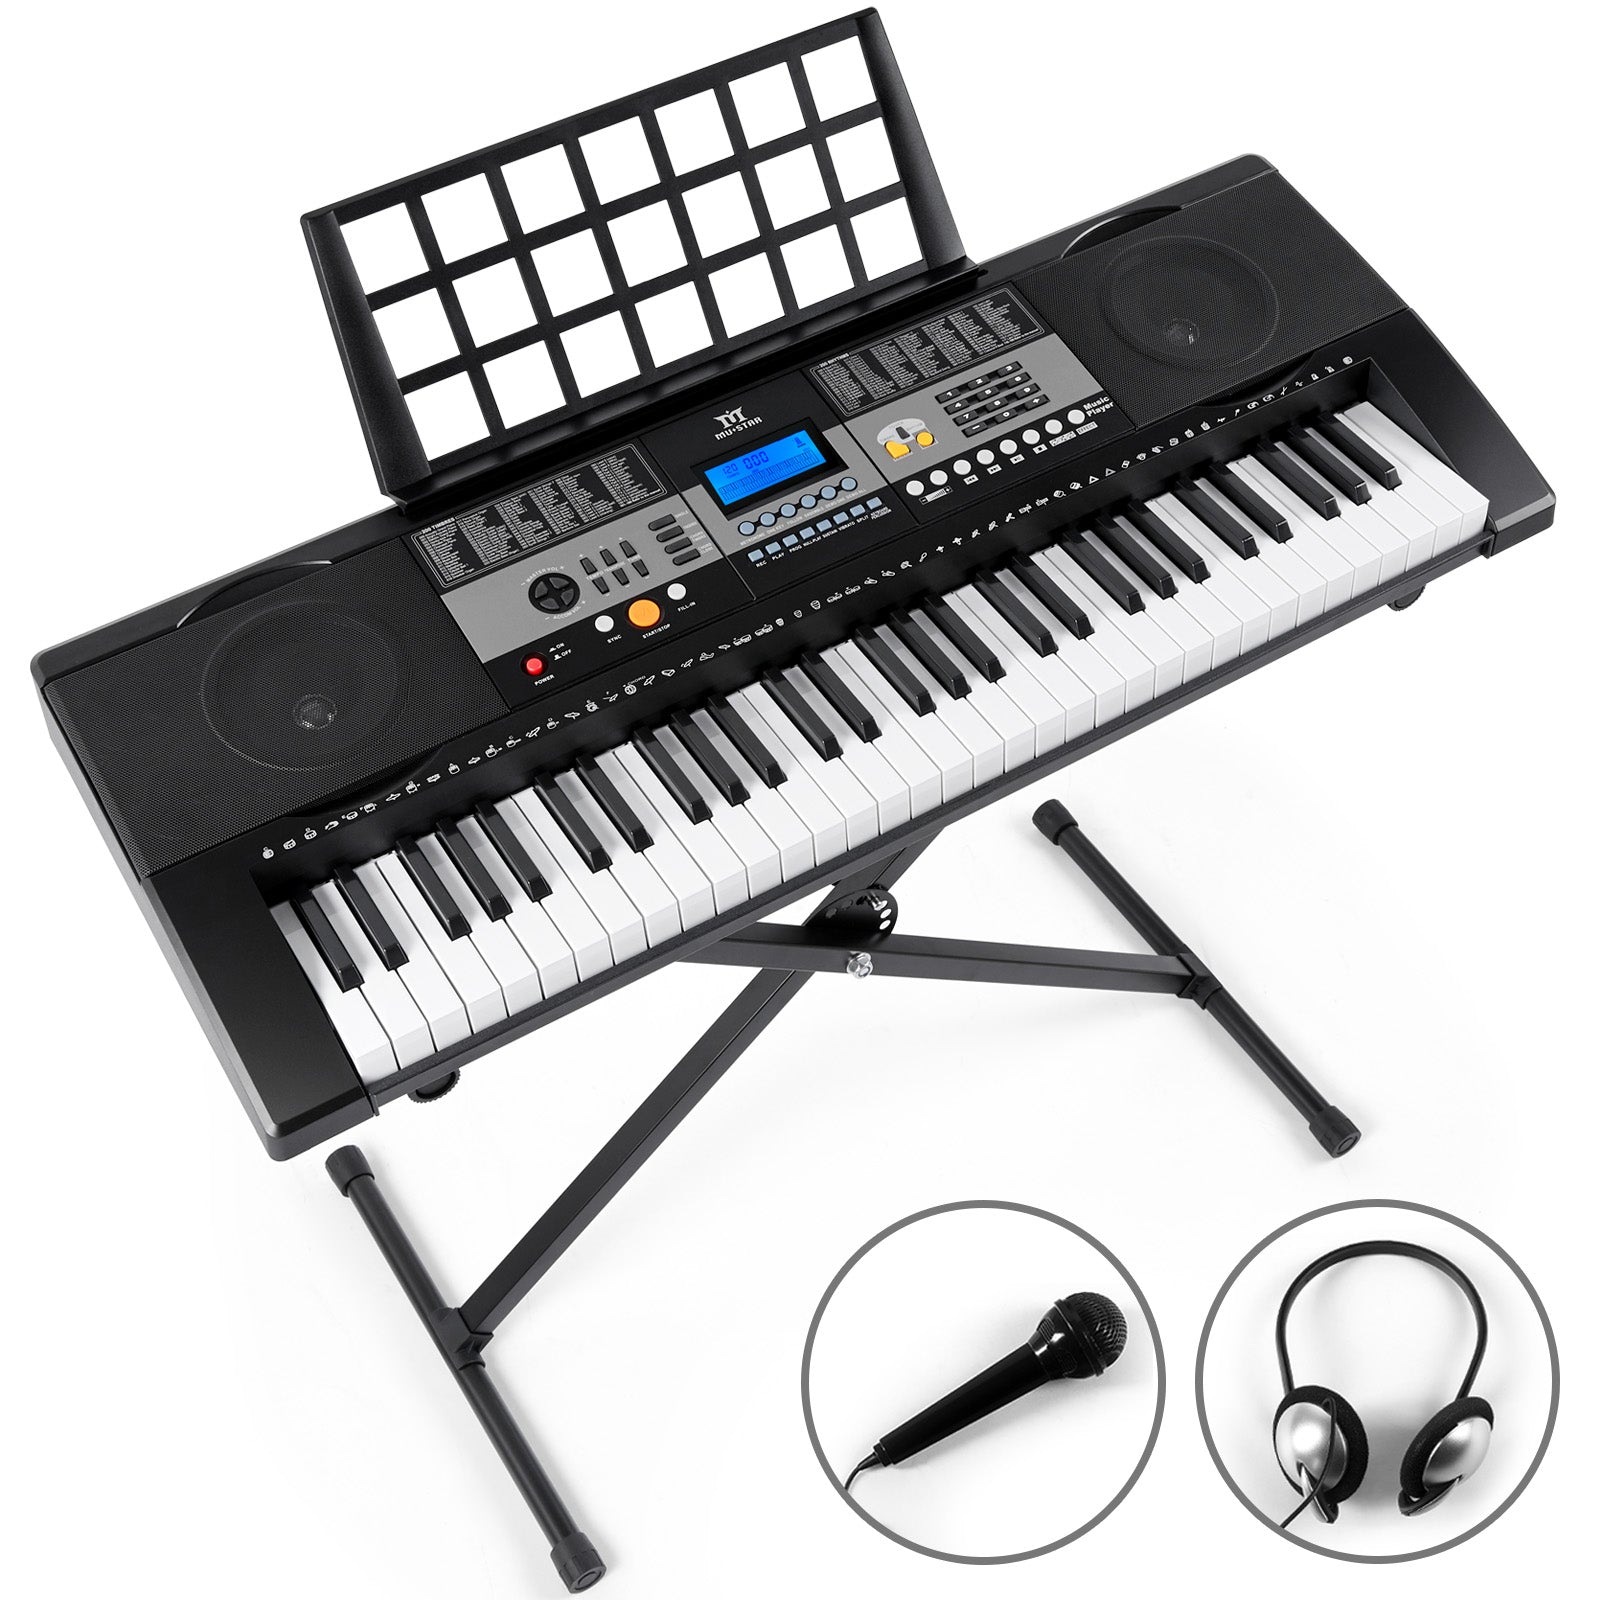  61-Key Electronic Music Keyboard Piano with LCD Display and  Microphone - Portable - Black : Musical Instruments